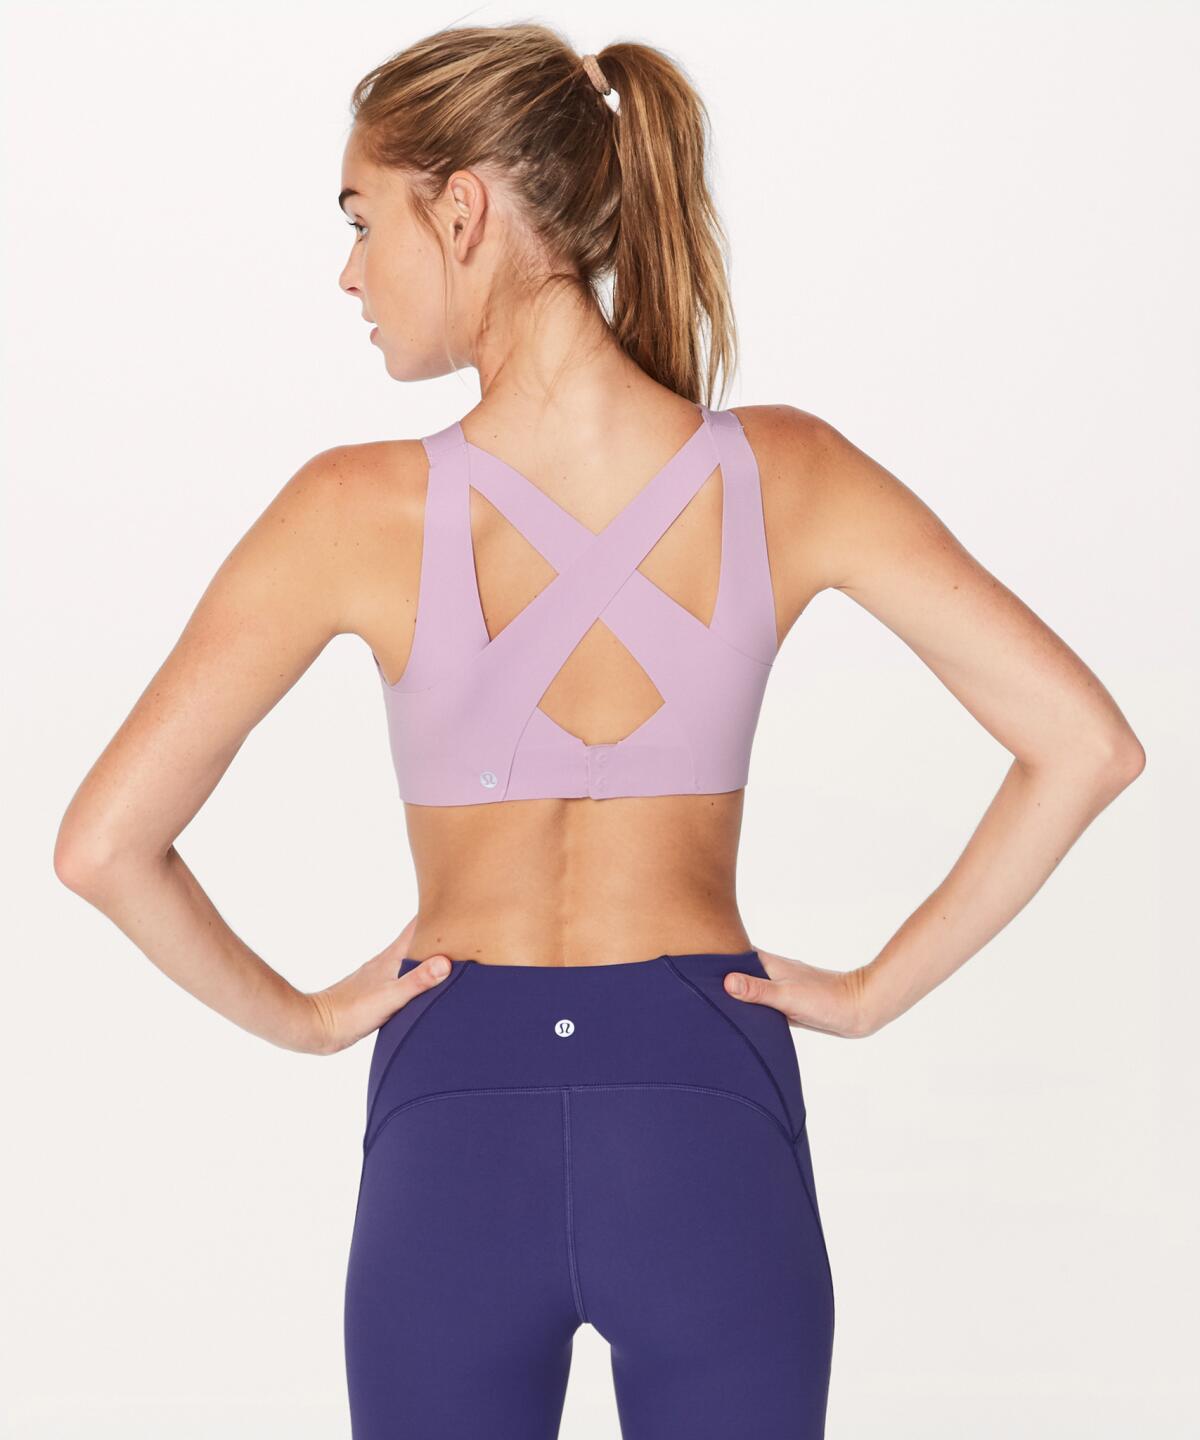 Tikiboo launches flamin' hot new summer gym wear collection